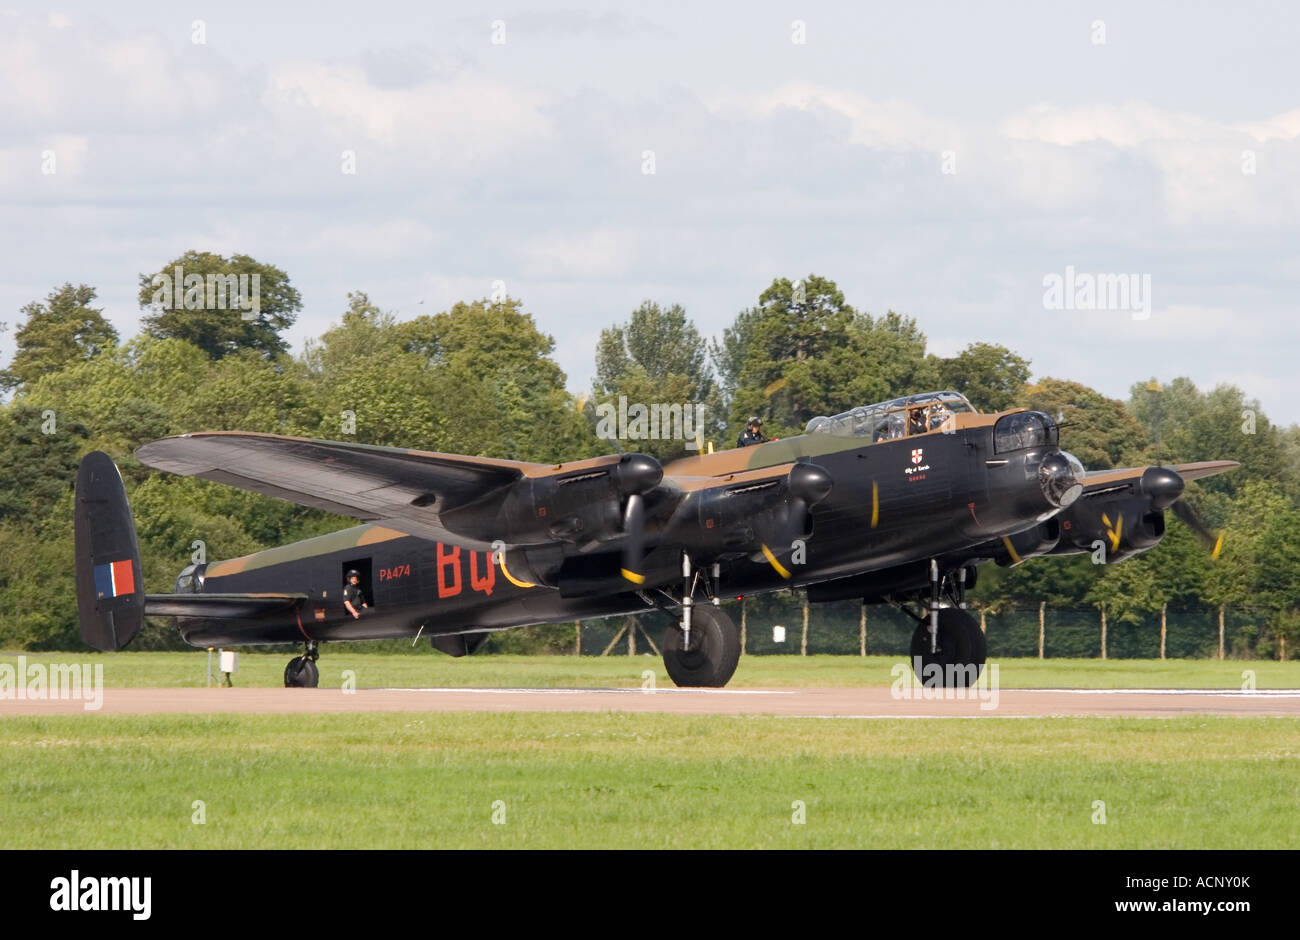 Preserved Royal Air Force Avro Lancaster B1 World War Two heavy bomber aircraft at RAF Fairford Stock Photo